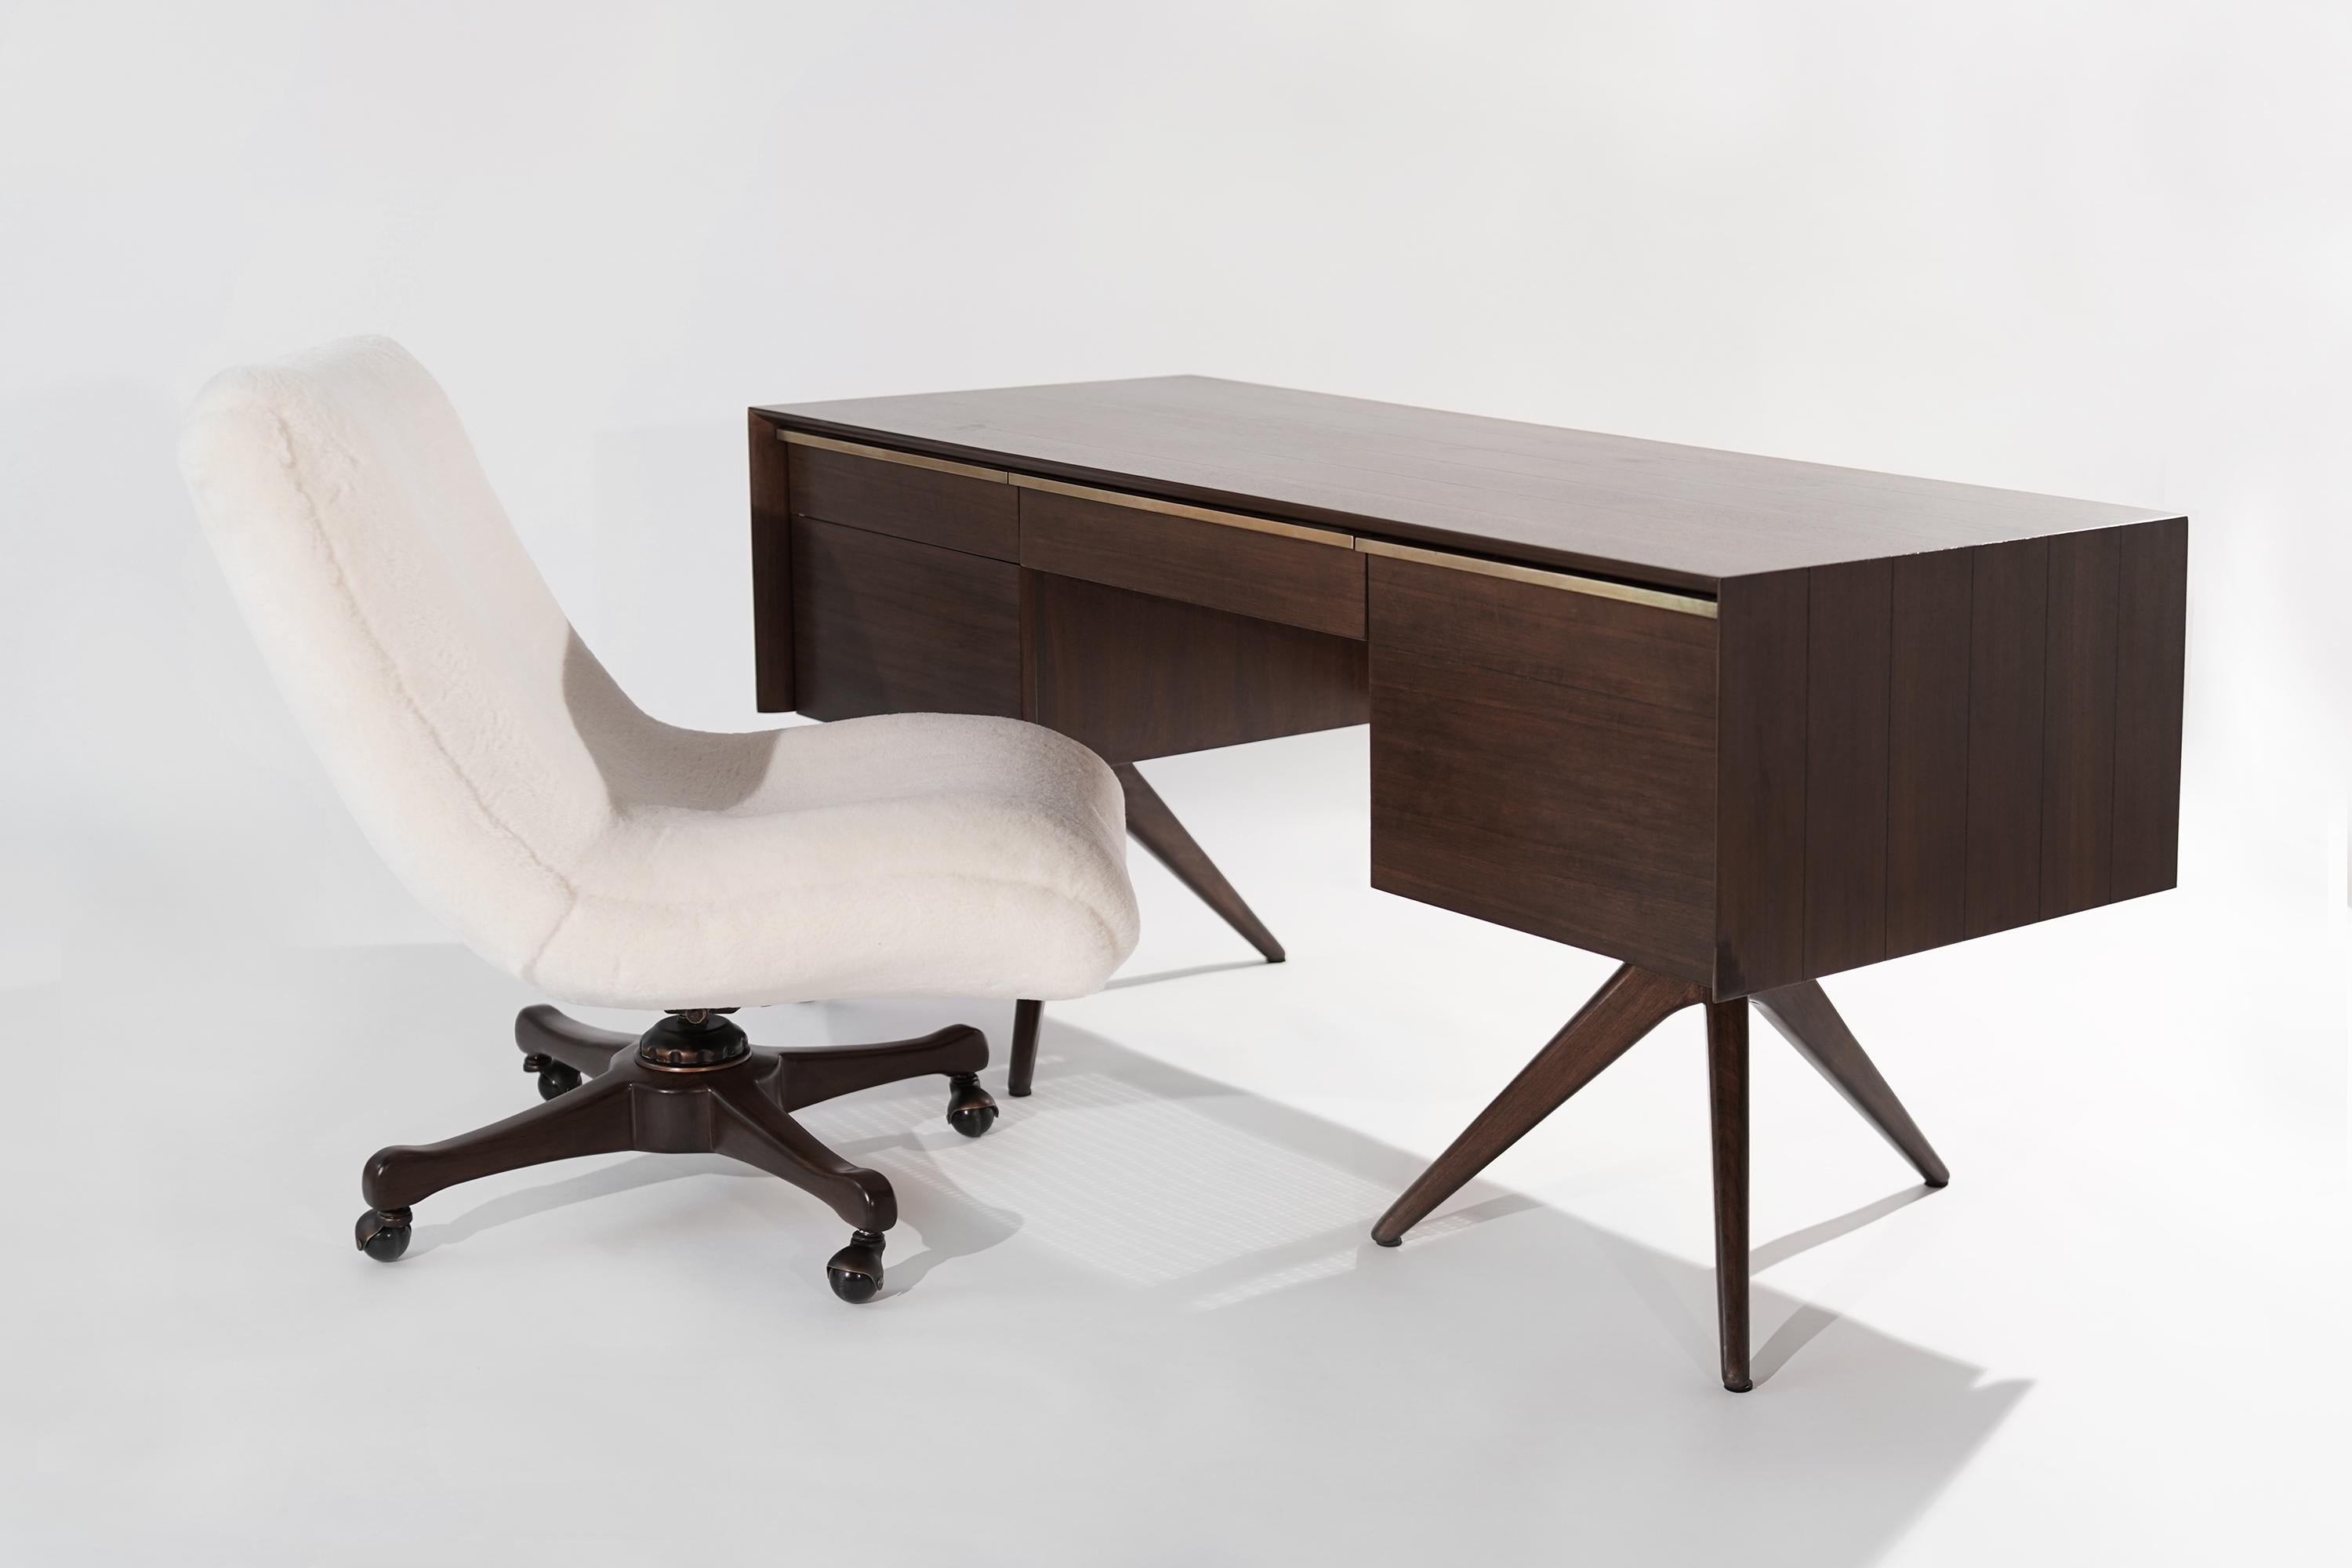 Impressive and rare walnut desk designed by Vladimir Kagan for Grosfeld House, NY, circa 1950s.
Walnut case design features ebony stripes, caned back, and brass hardware. 

Completely restored to back its original integrity, drawers slide